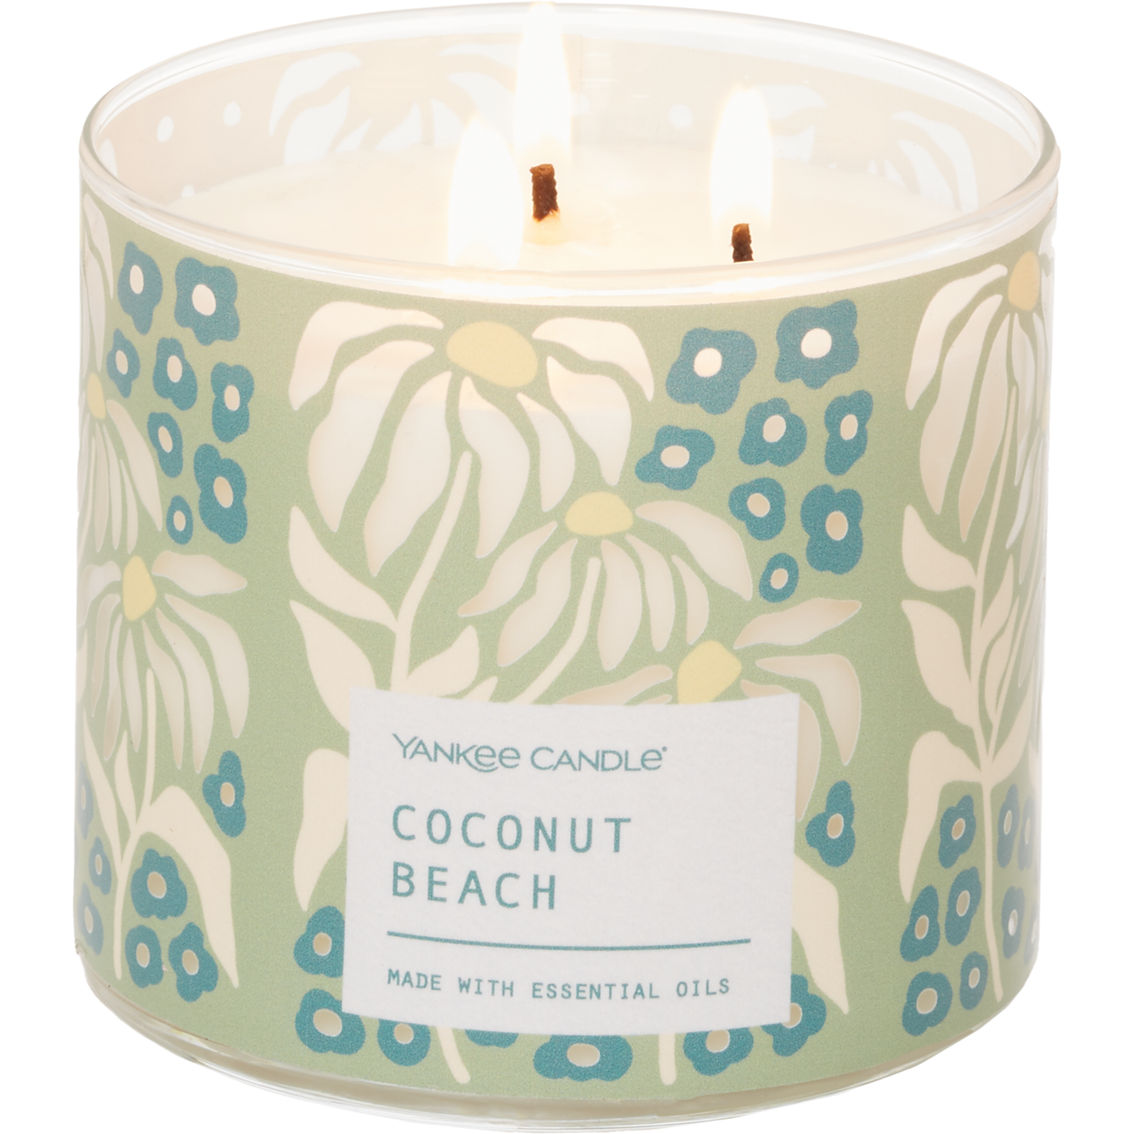 Yankee Candle Coconut Beach 3-Wick Candle - Image 2 of 2